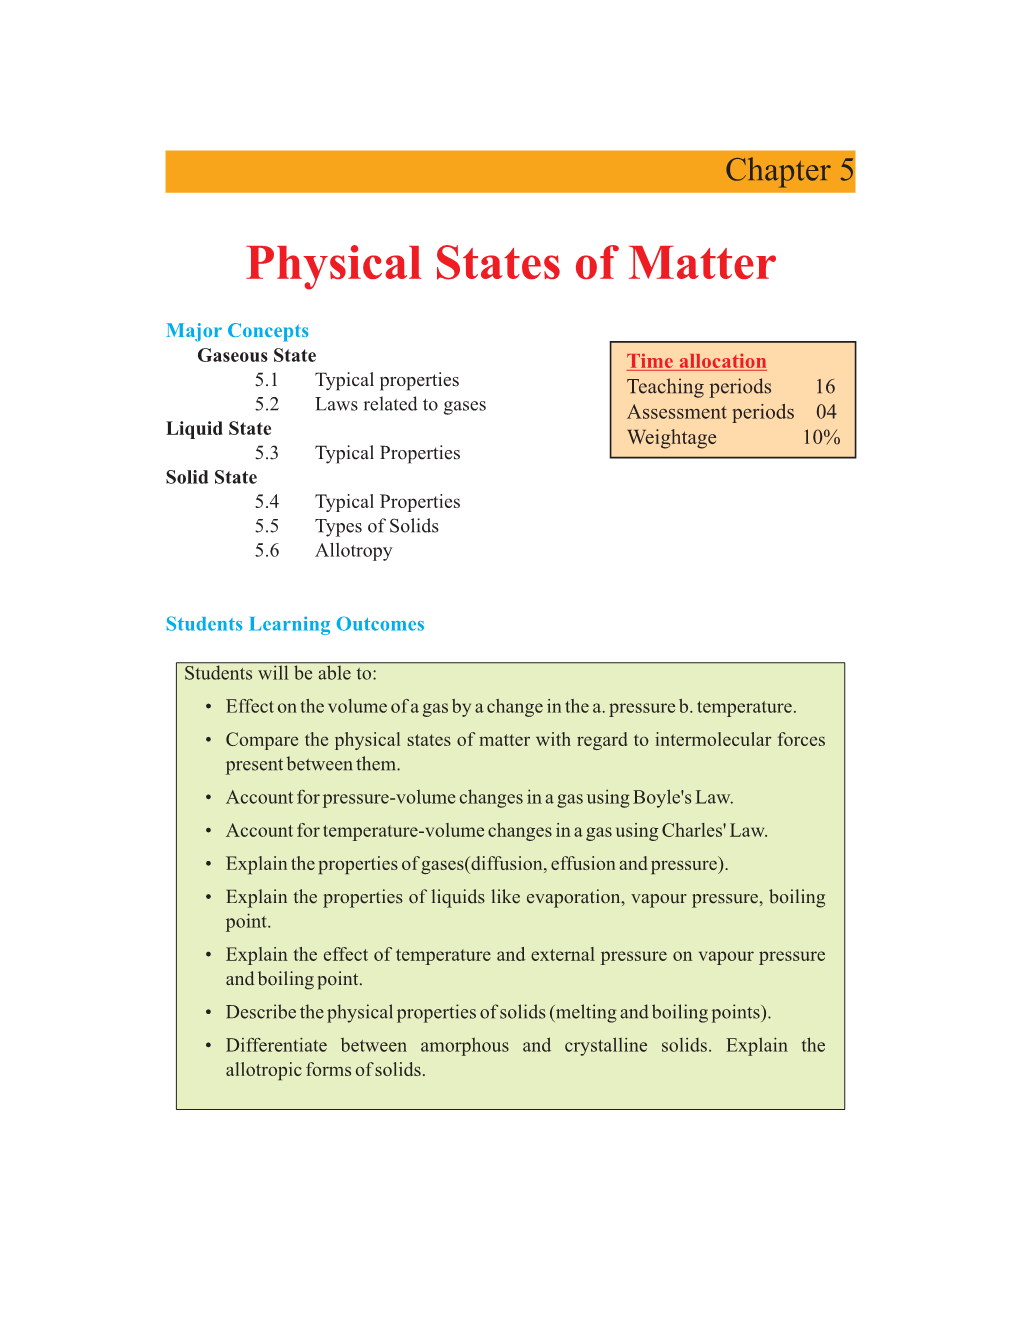 Physical States of Matter